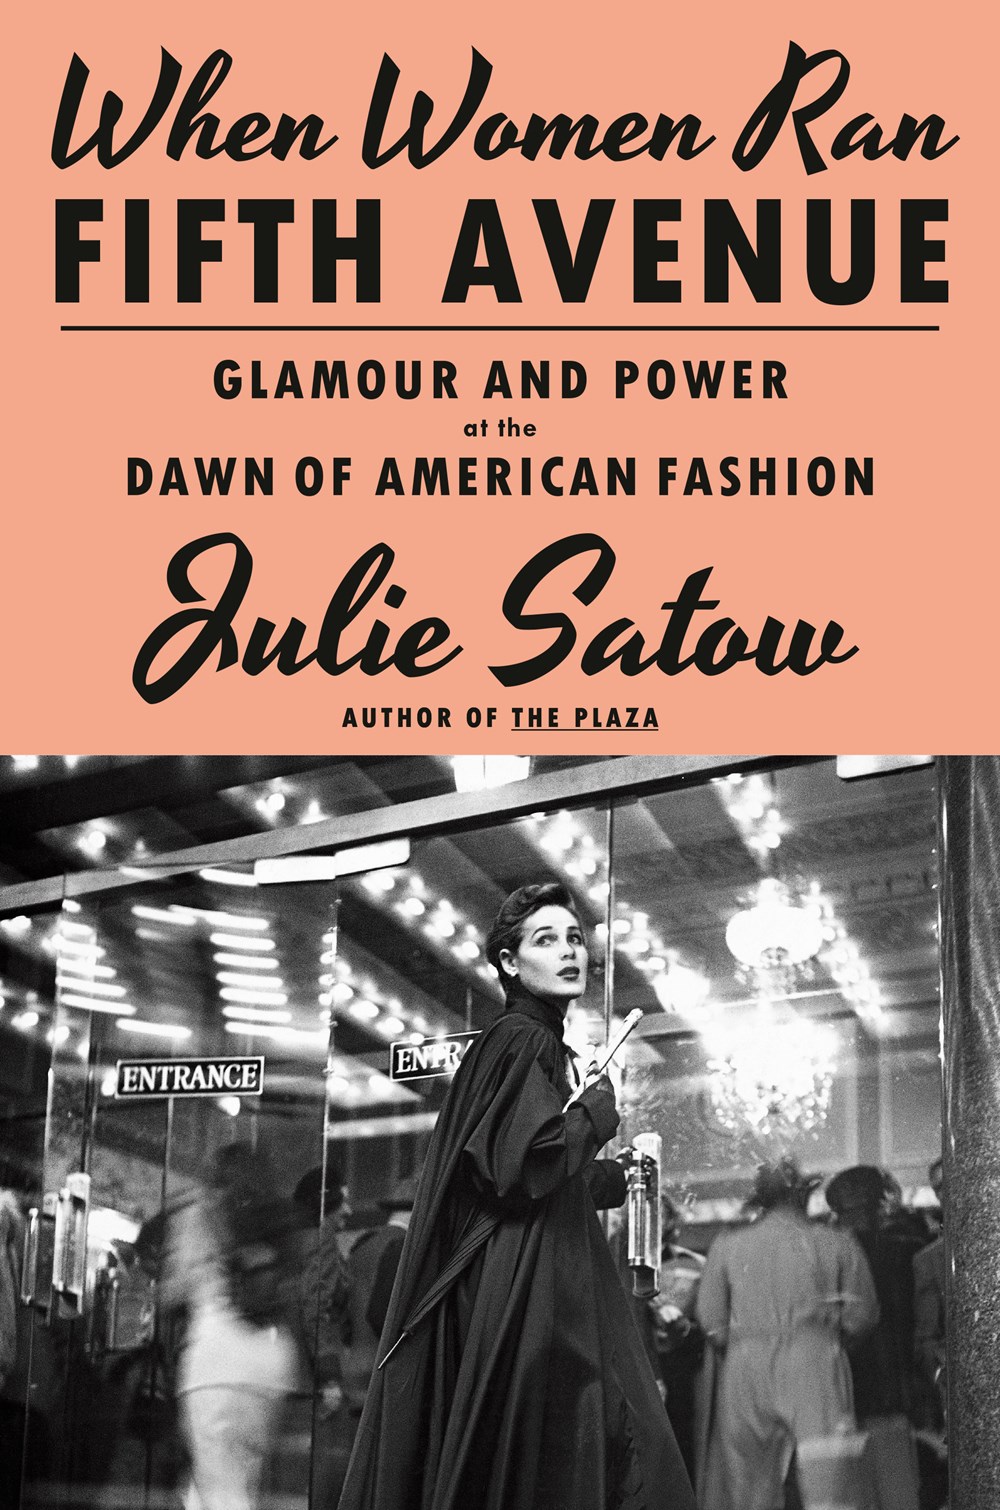 When Women Ran Fifth Ave: Glamour and Power at the Dawn of American Fashion